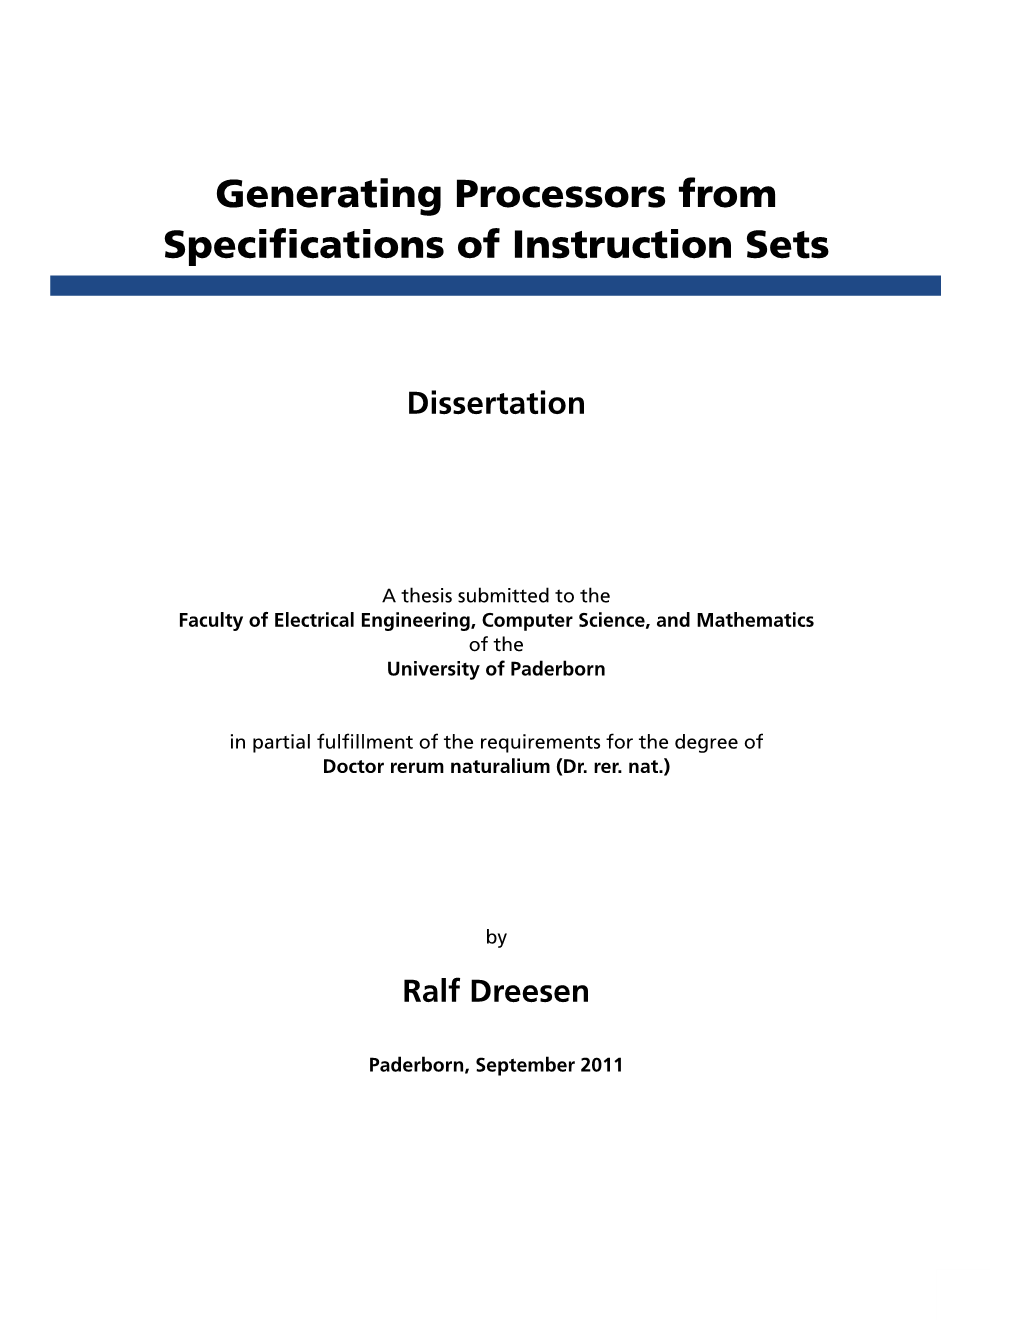 Generating Processors from Specifications of Instruction Sets